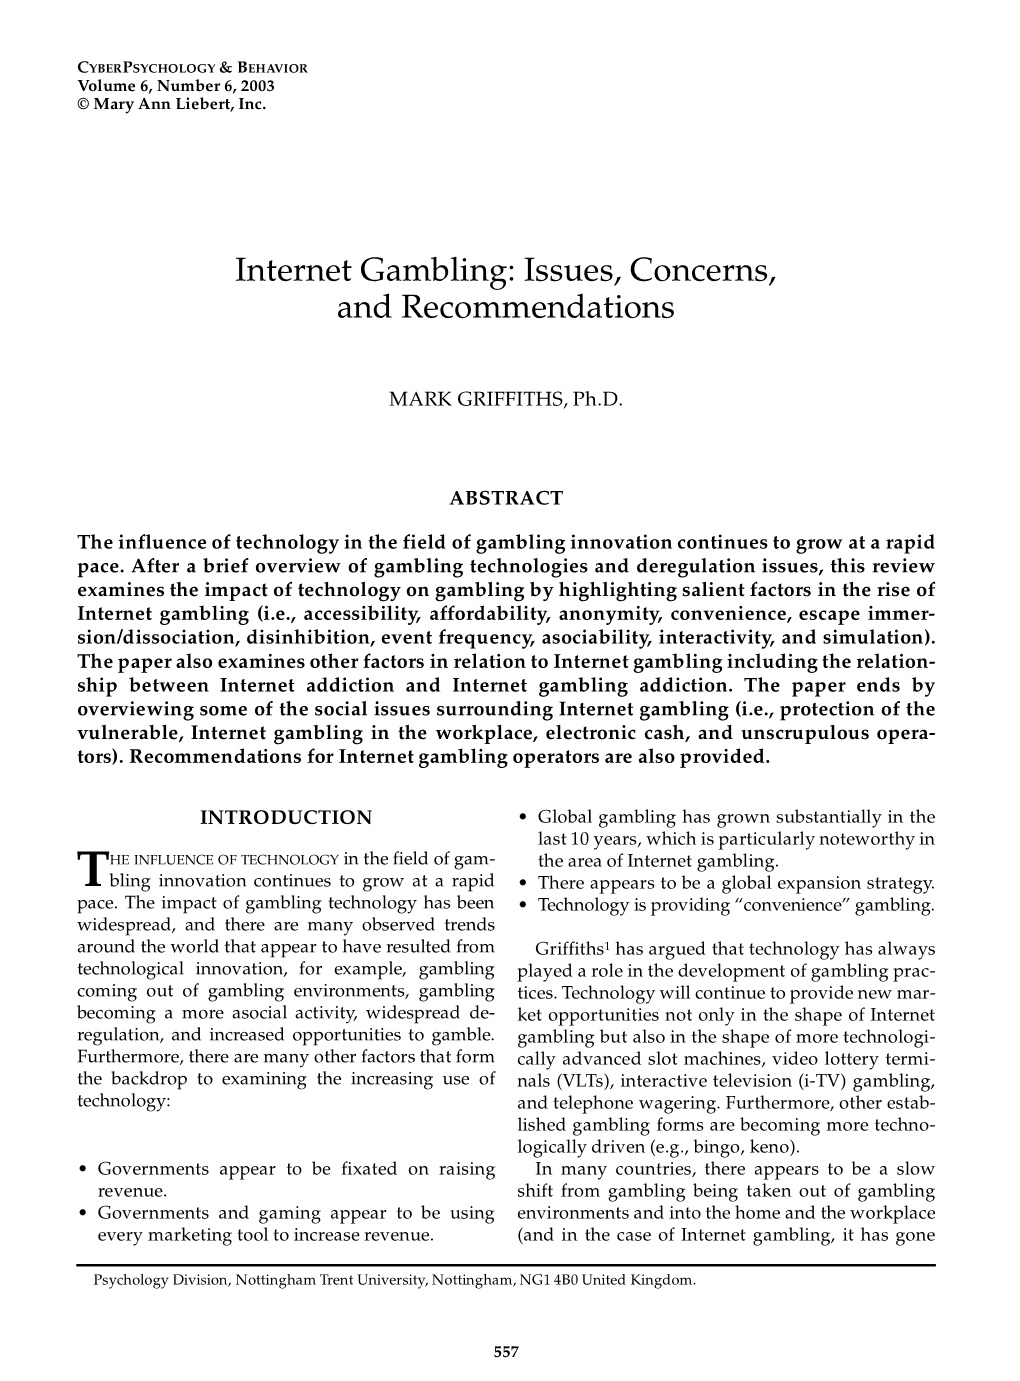 Internet Gambling: Issues, Concerns, and Recommendations